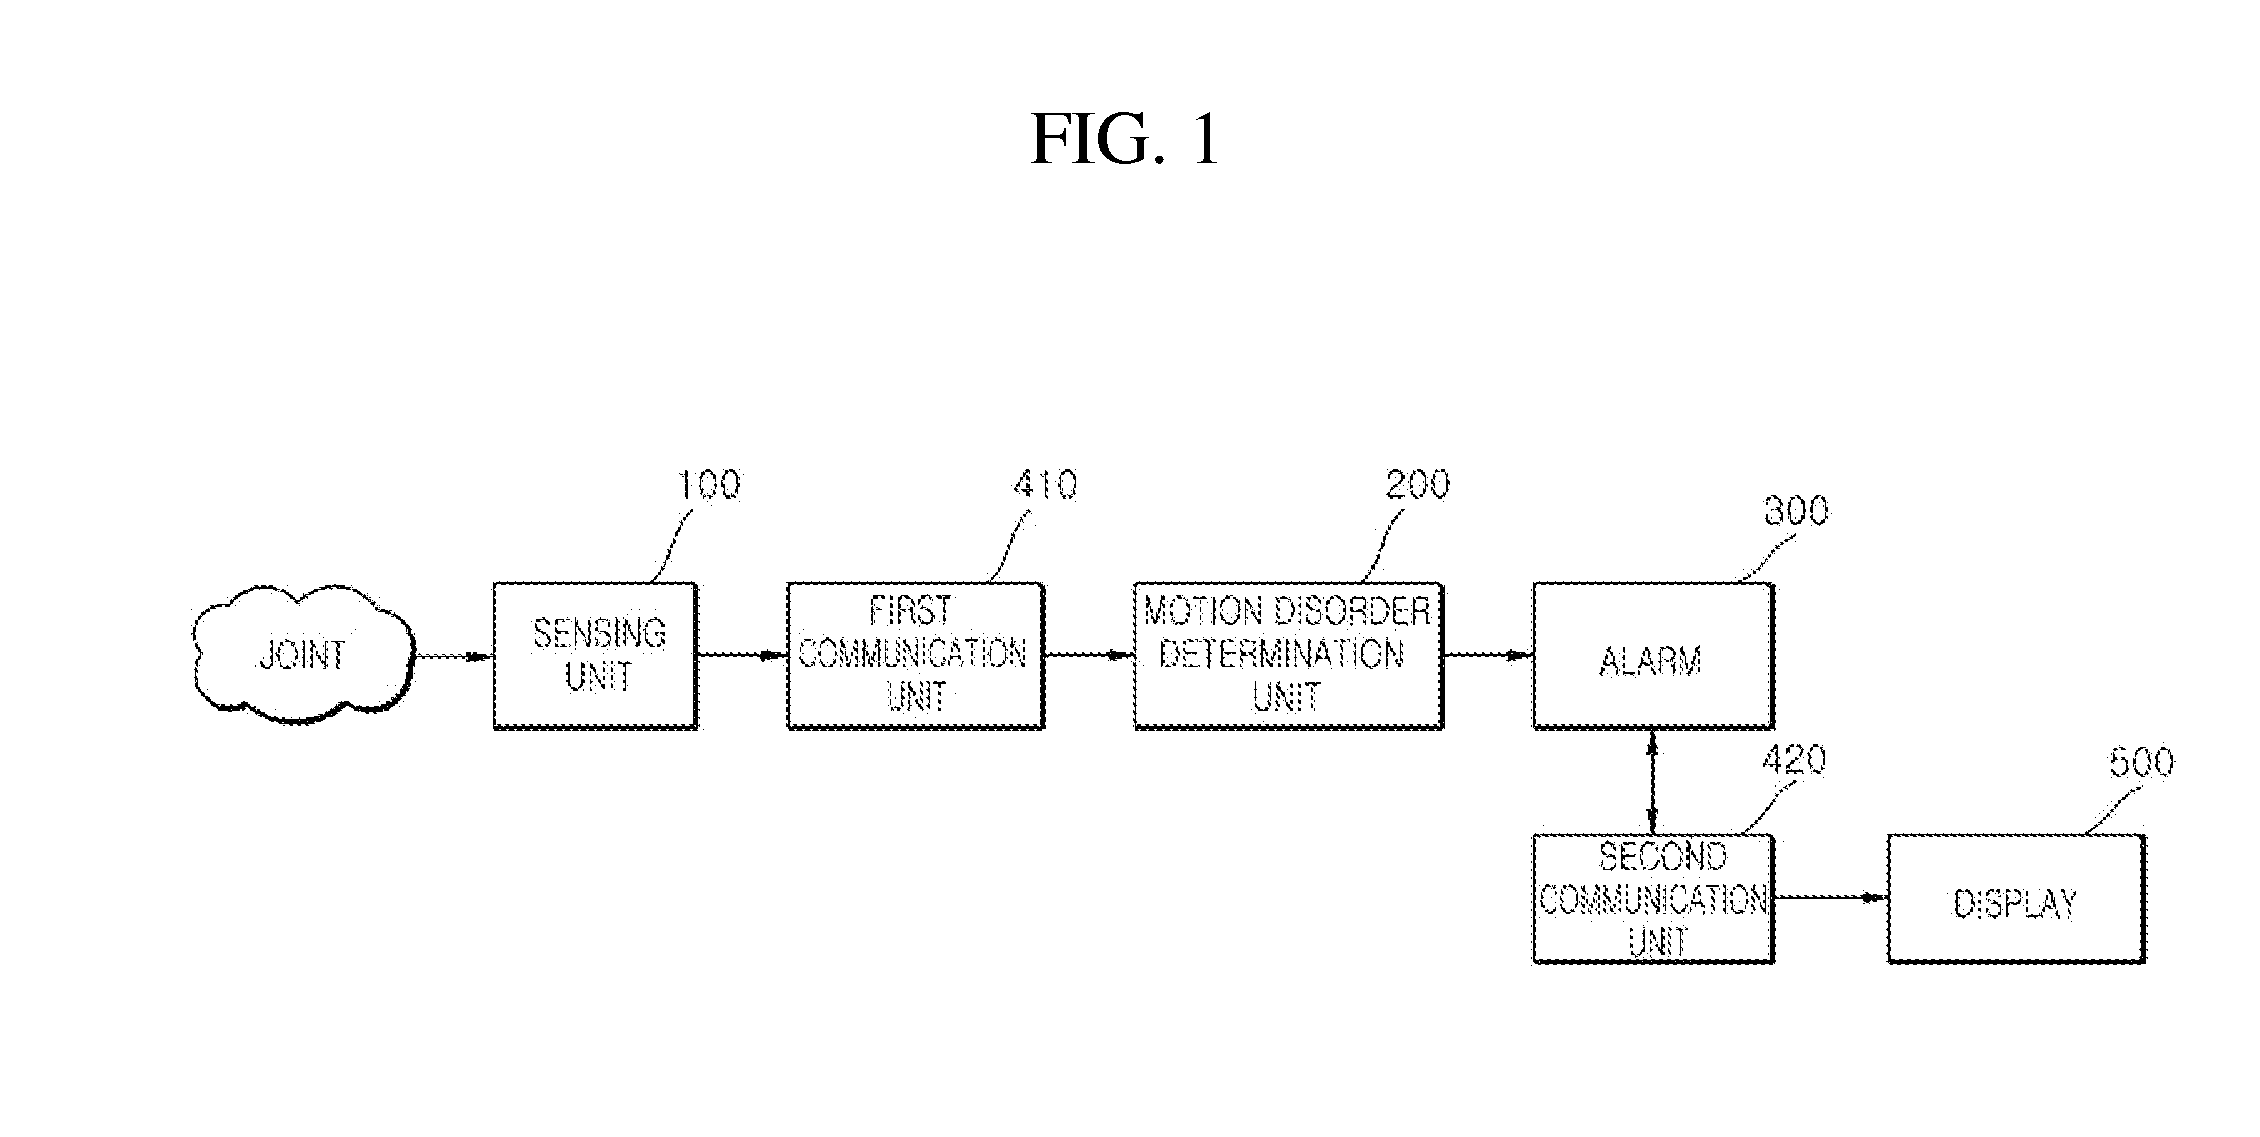 Apparatus for early detection of paralysis based on motion sensing